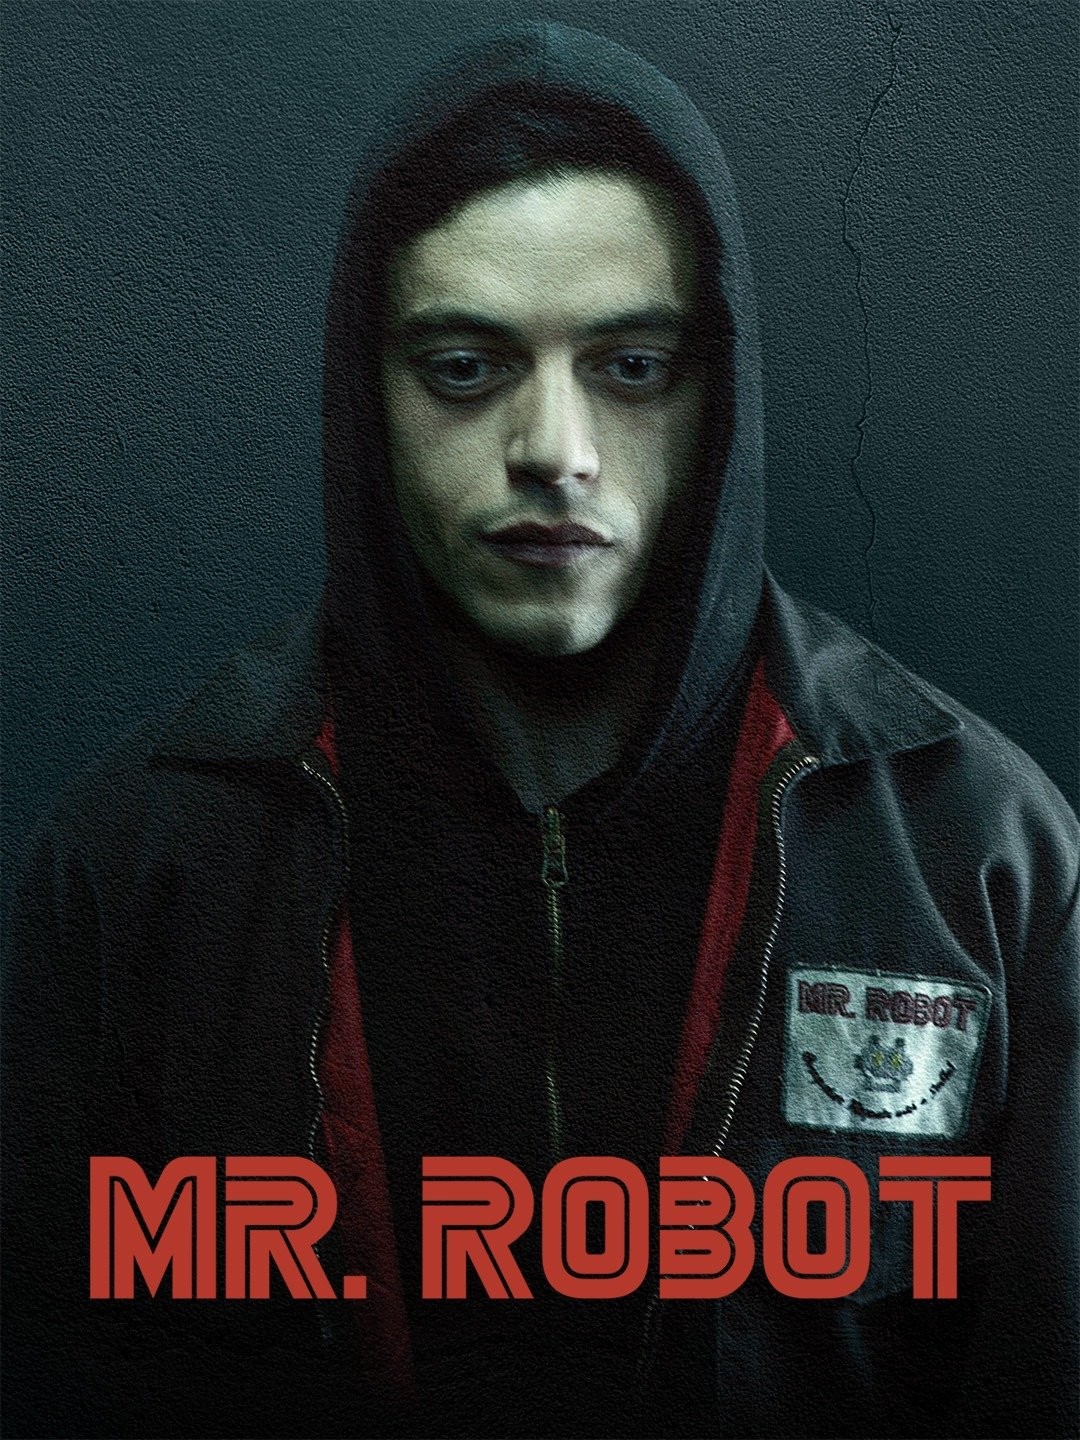 Mr. Robot Season 4 Will Be a 'Christmas Special' - TV Guide